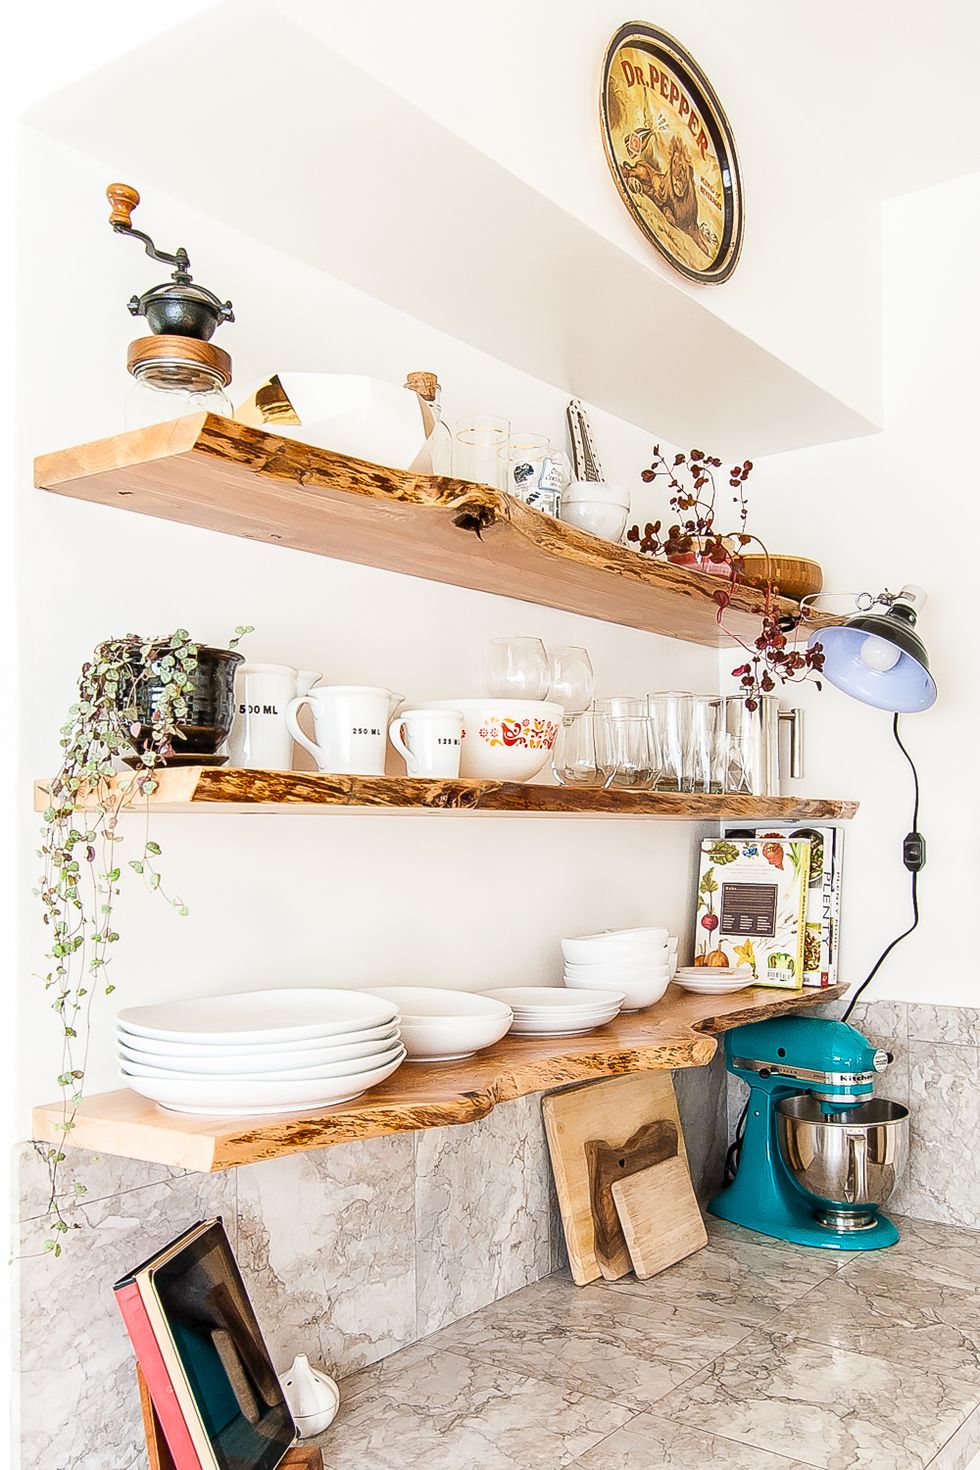 24 Ideas for Kitchens With Open Shelving